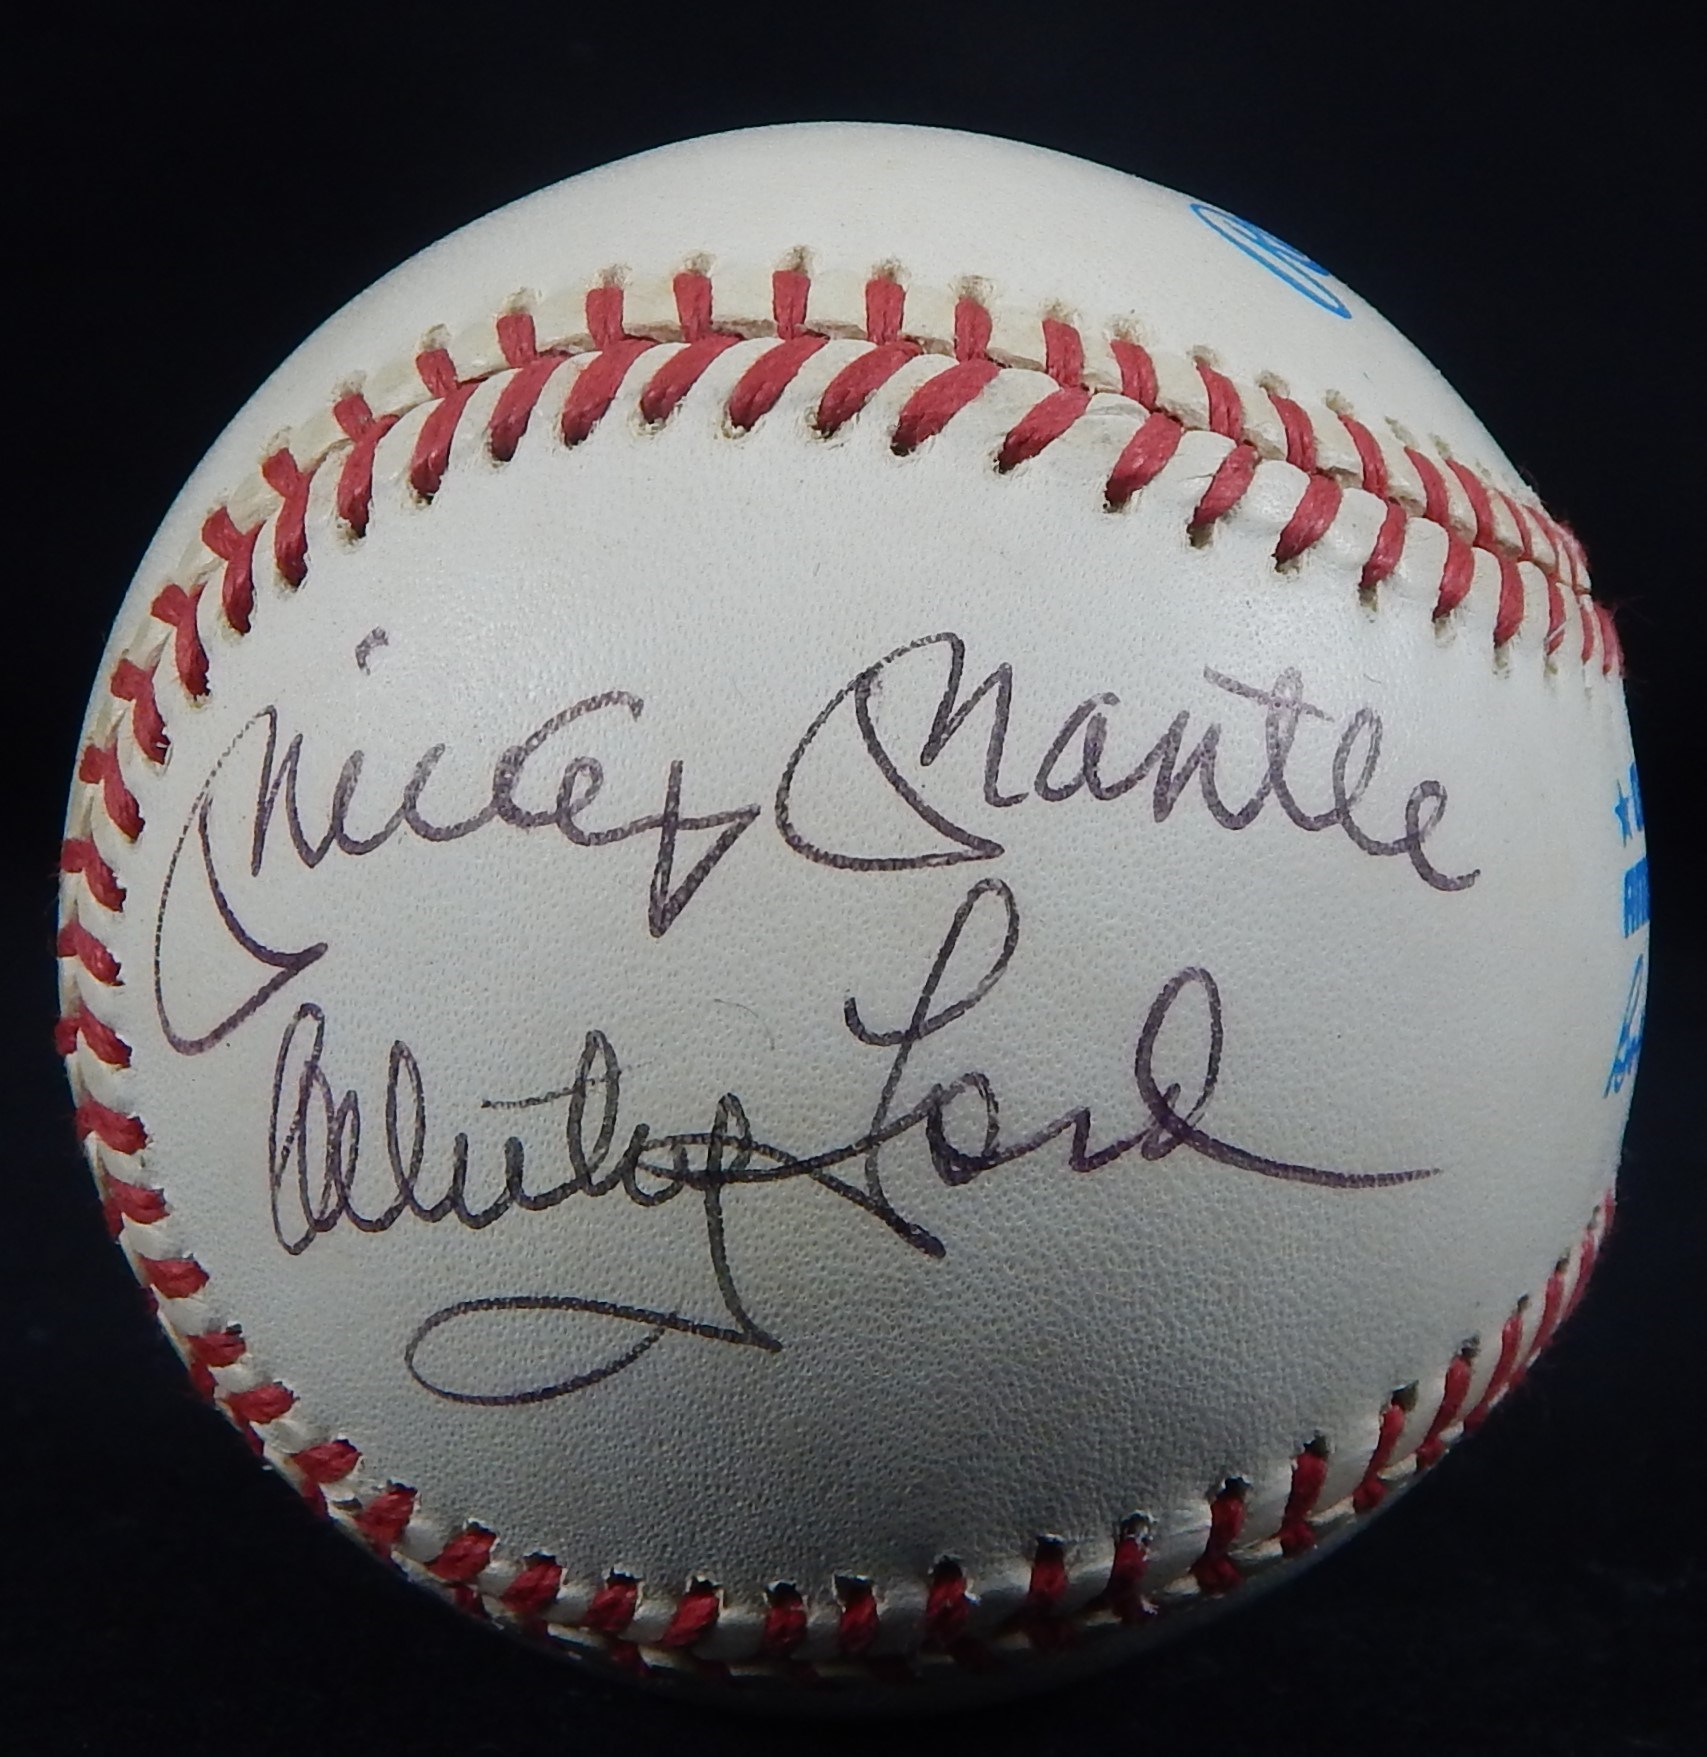 - Mantle, Berra and Ford Signed Baseball